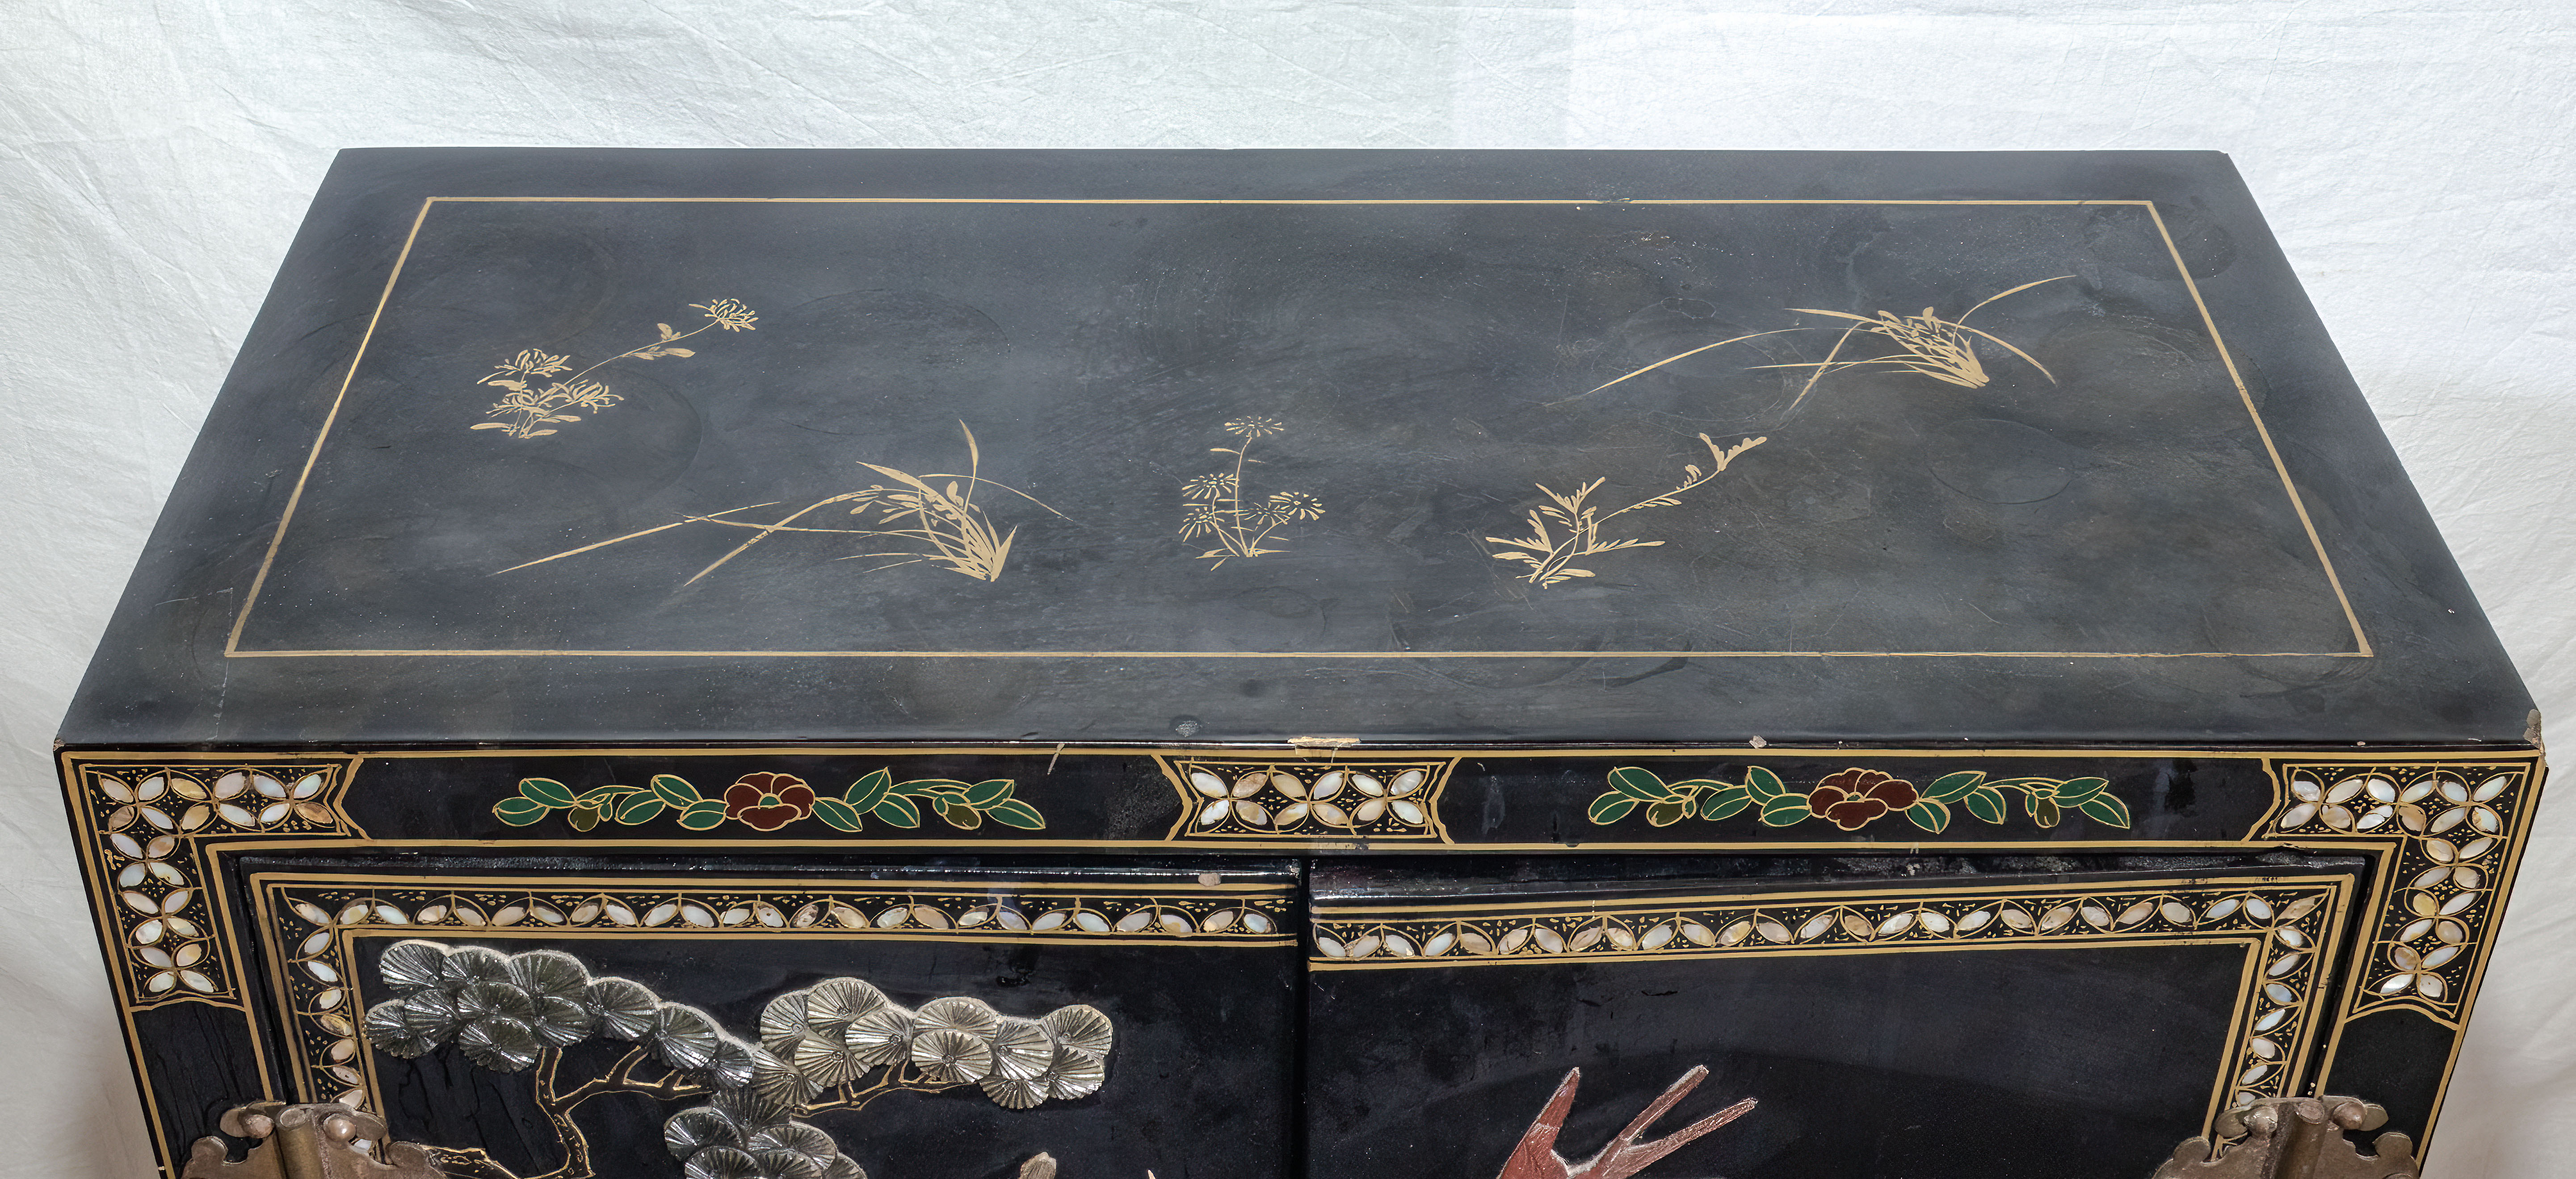 Chinese black lacquer heavily decorated marriage chest with mother of pearl flowers and birds , - Image 4 of 6